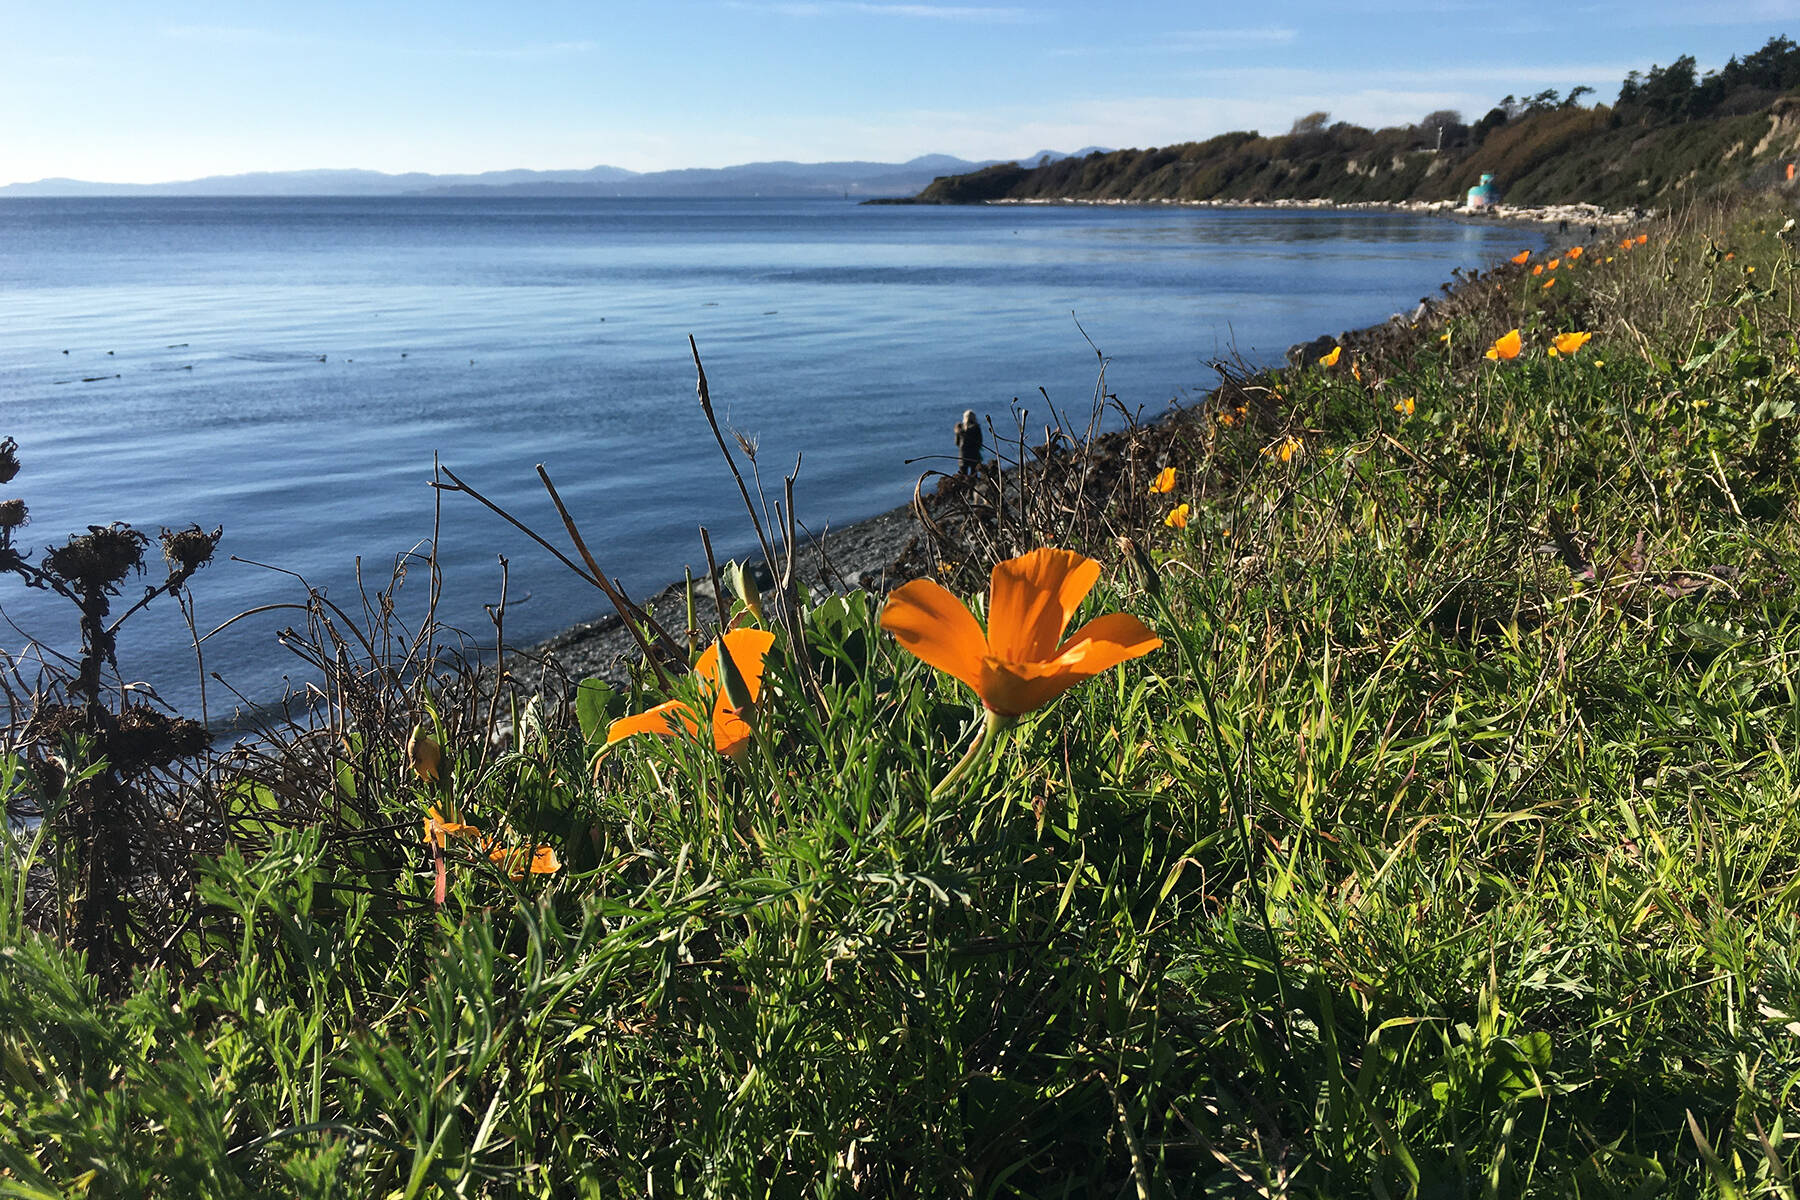 Victoria has been found to be one of the world’s top remote work vacation spots. Flowers believed to be California poppies bloom on the waterfront below Dallas Road near Clover Point on a sunny weekend day in Victoria. (Black Press Media file photo)